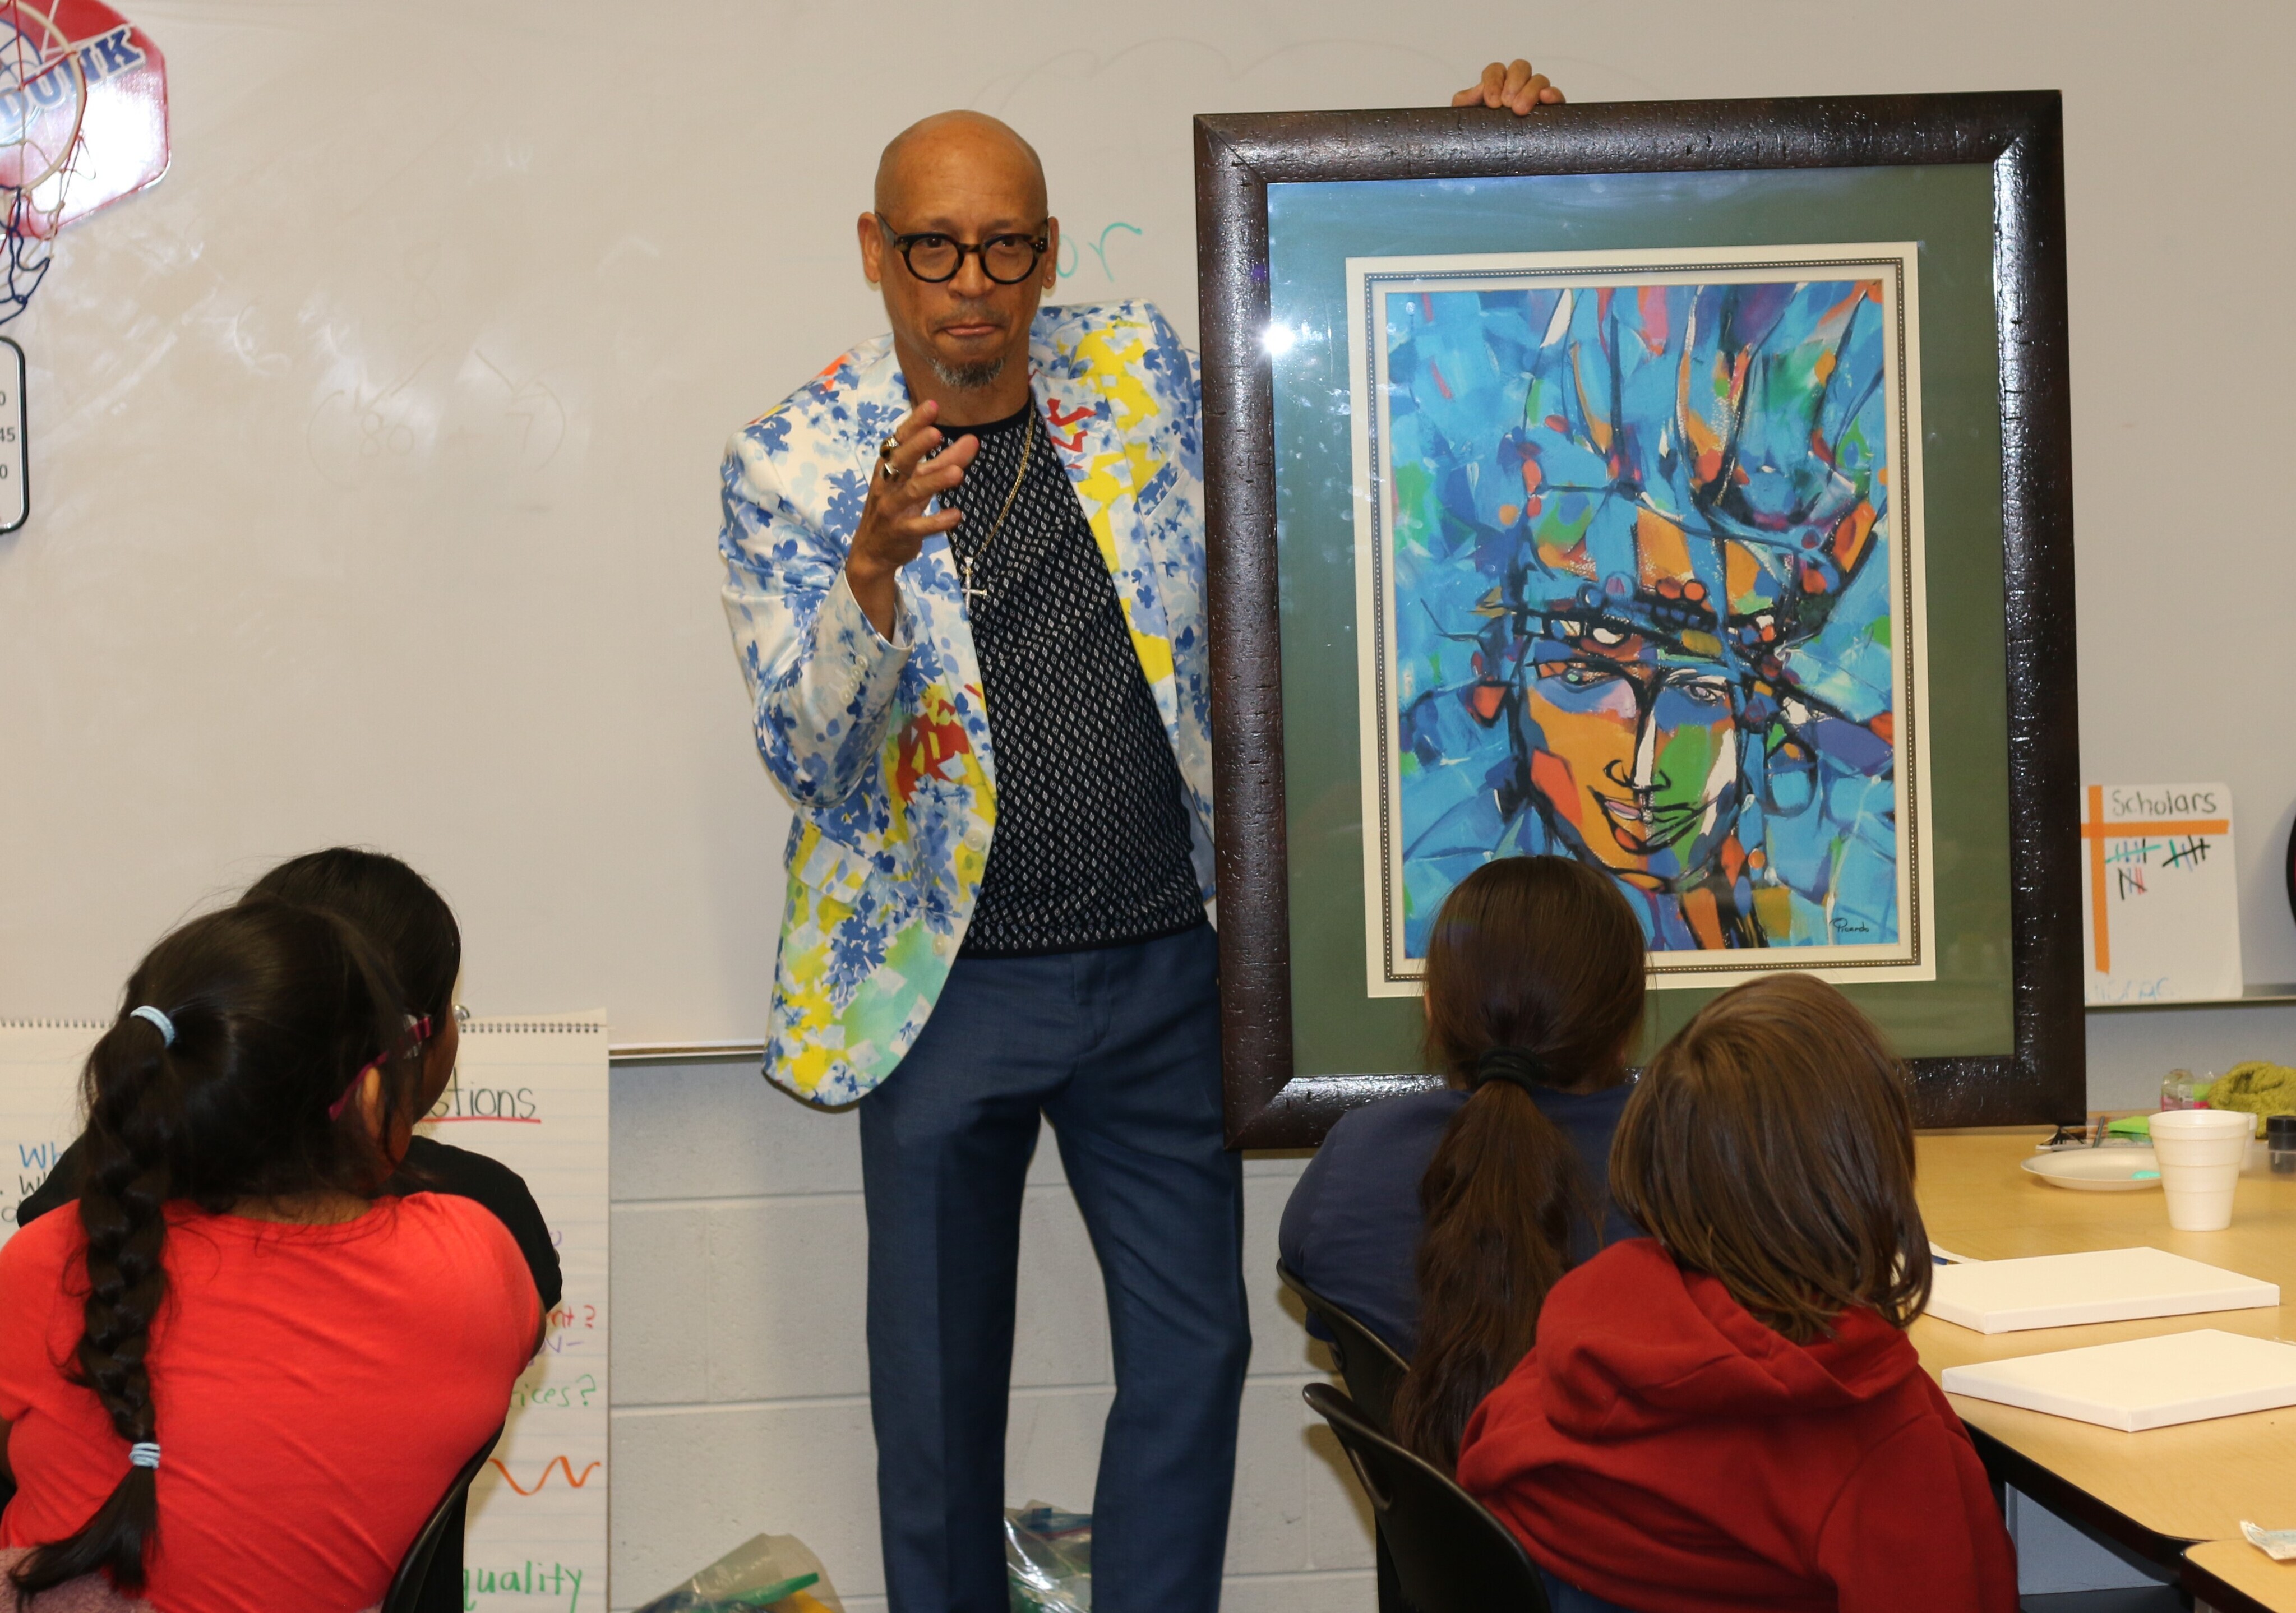 Local artist Erick Picardo visited numerous GRPS schools, including César E. Chávez Elementary, as part of Hispanic Heritage Month and brought along some of his own work to inspire the scholars